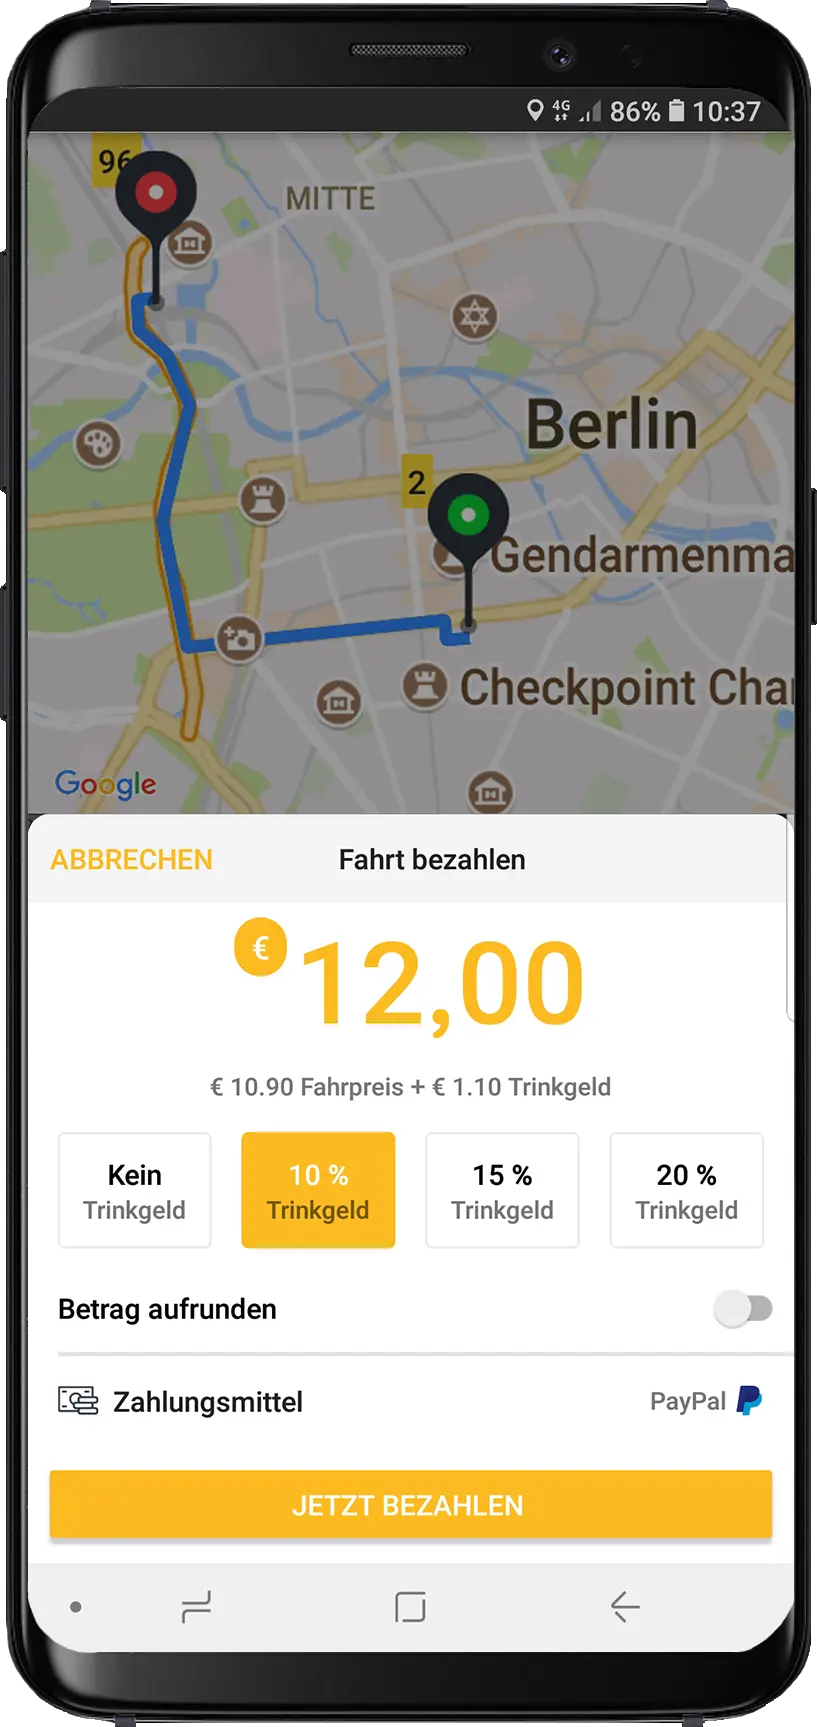 taxi app germany - Does Germany have a taxi app